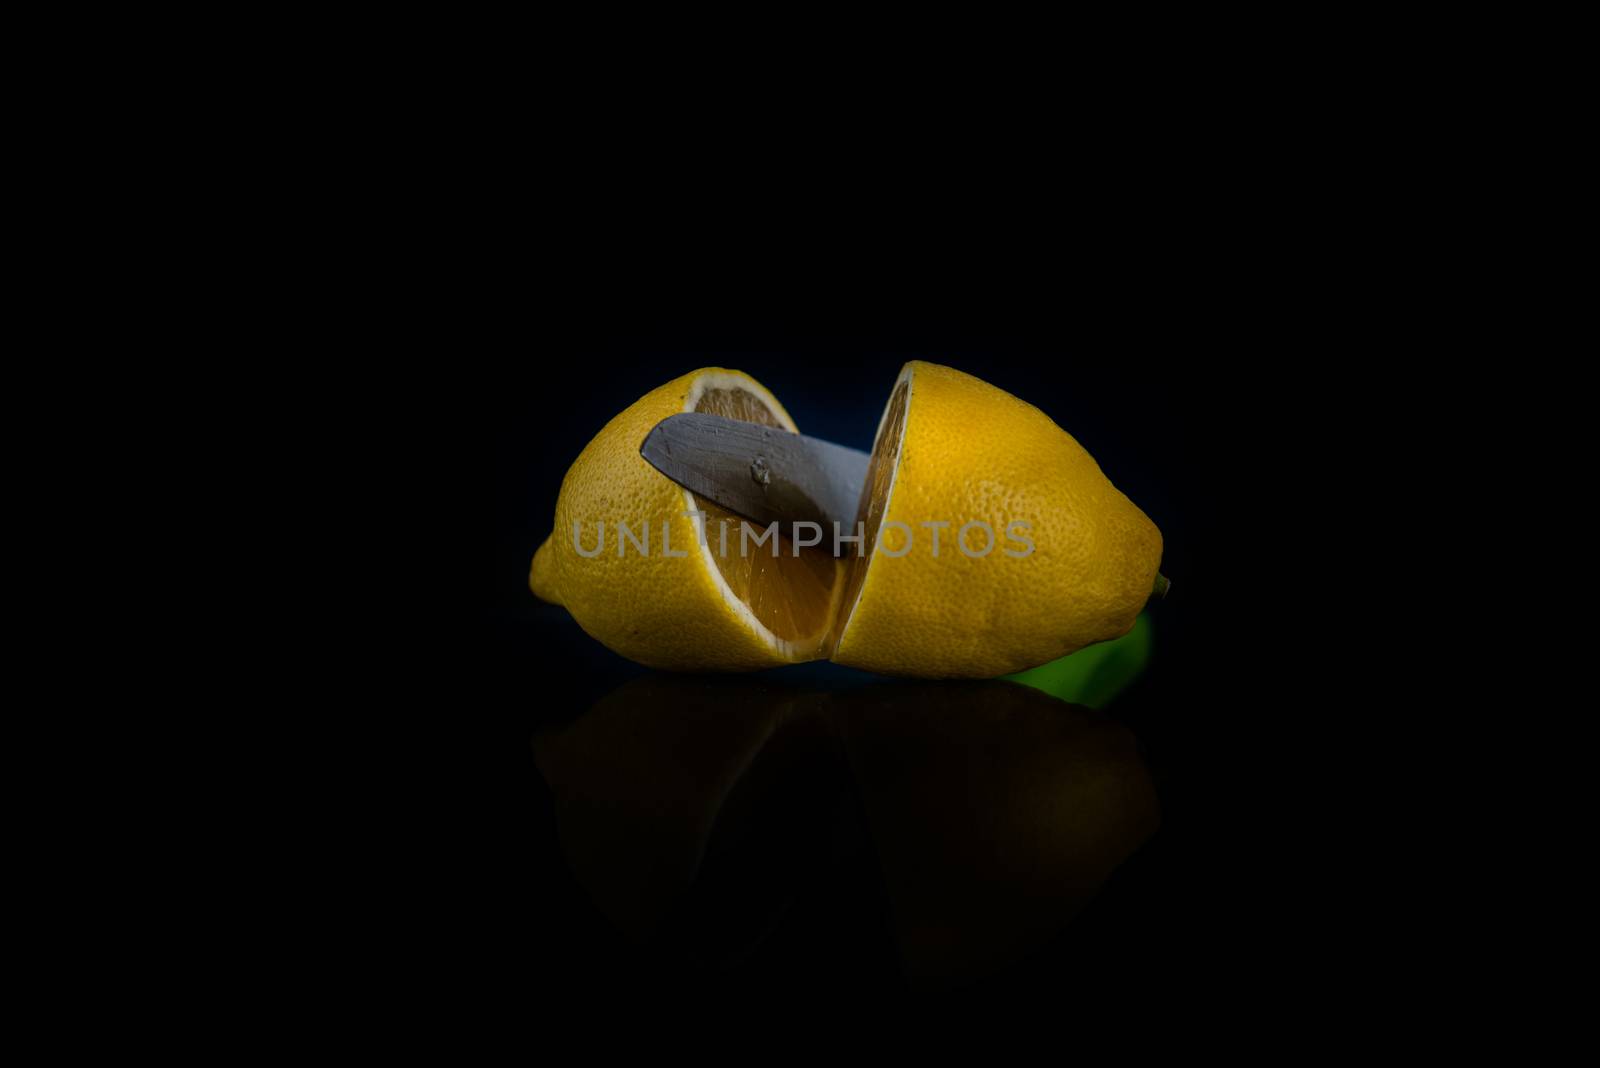 two halves of lemon cut with a knife on a black background by marynkin